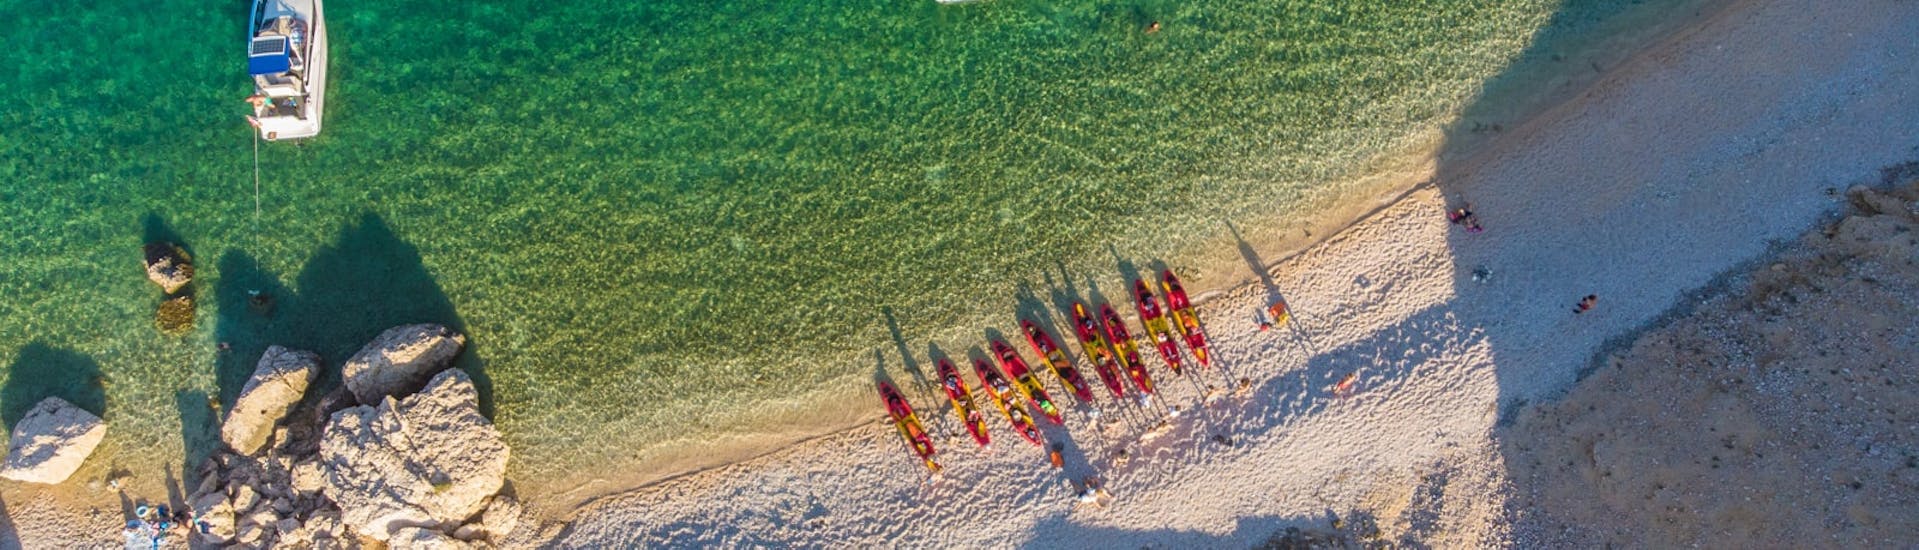 A picture taken from above with all the kayaks laying on the beach during the Sea Kayaking in Pag Bay from Sunturist.